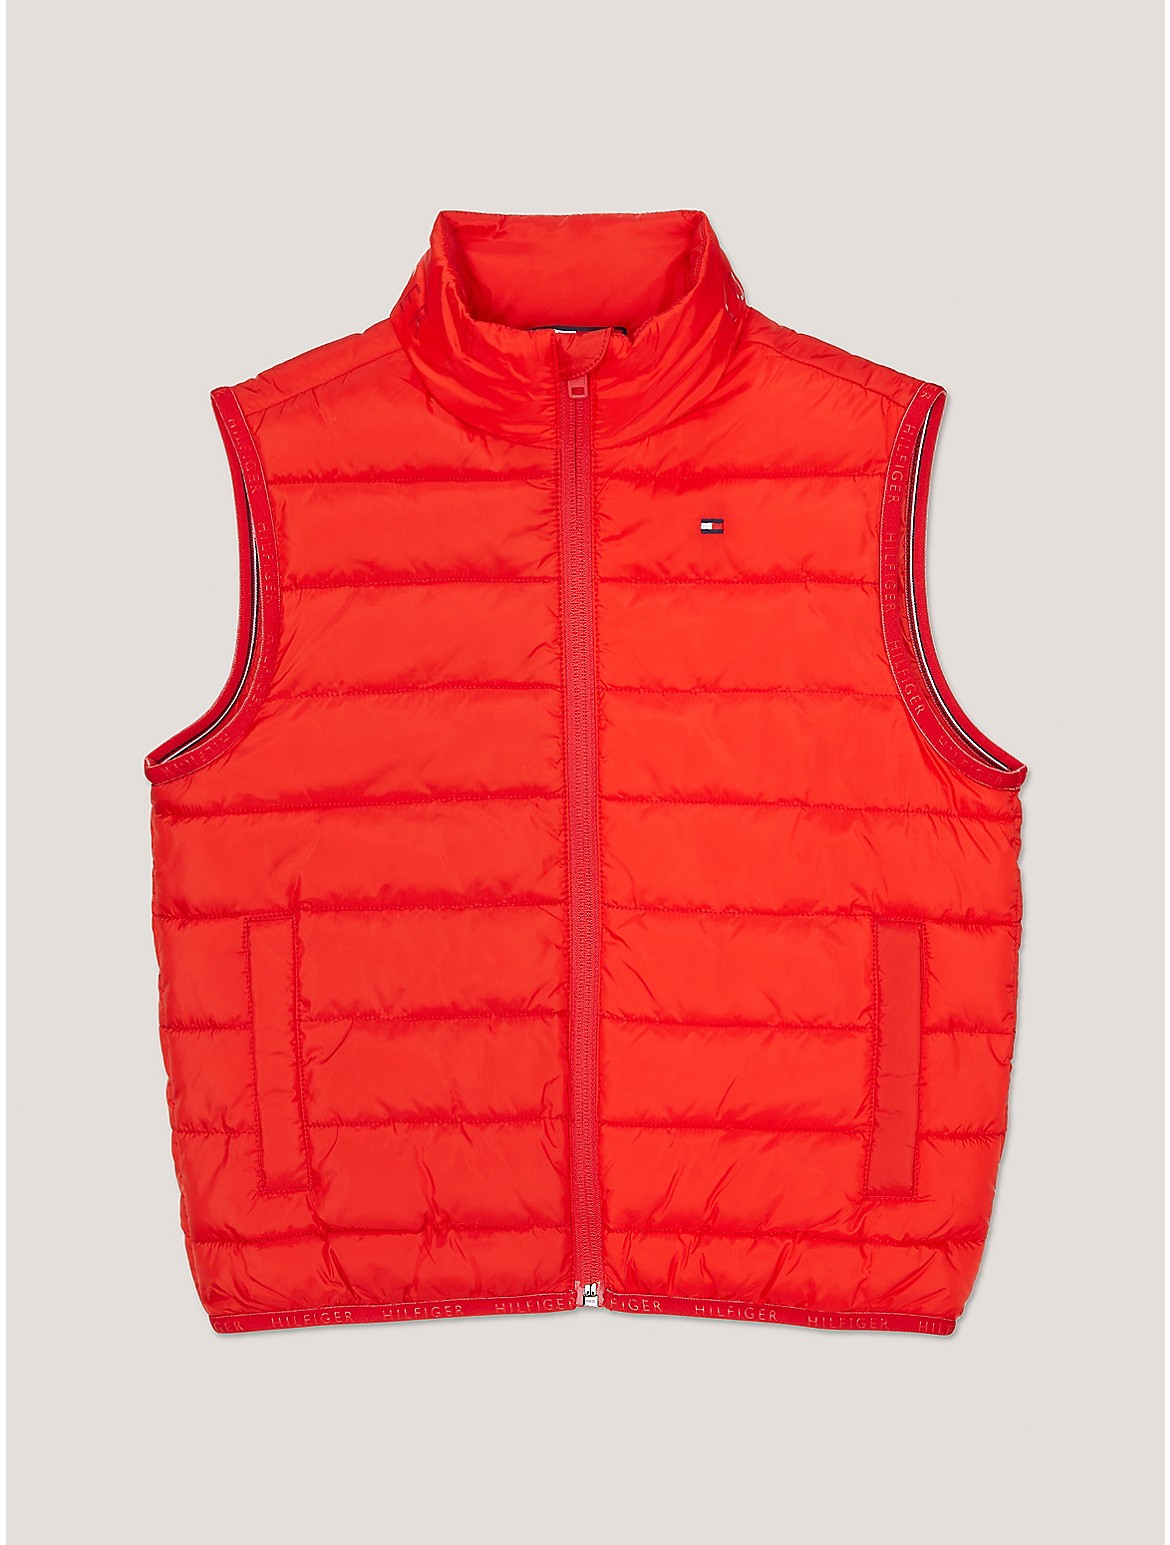 Tommy Hilfiger Boys' Kids' Insulated Vest - Red - S